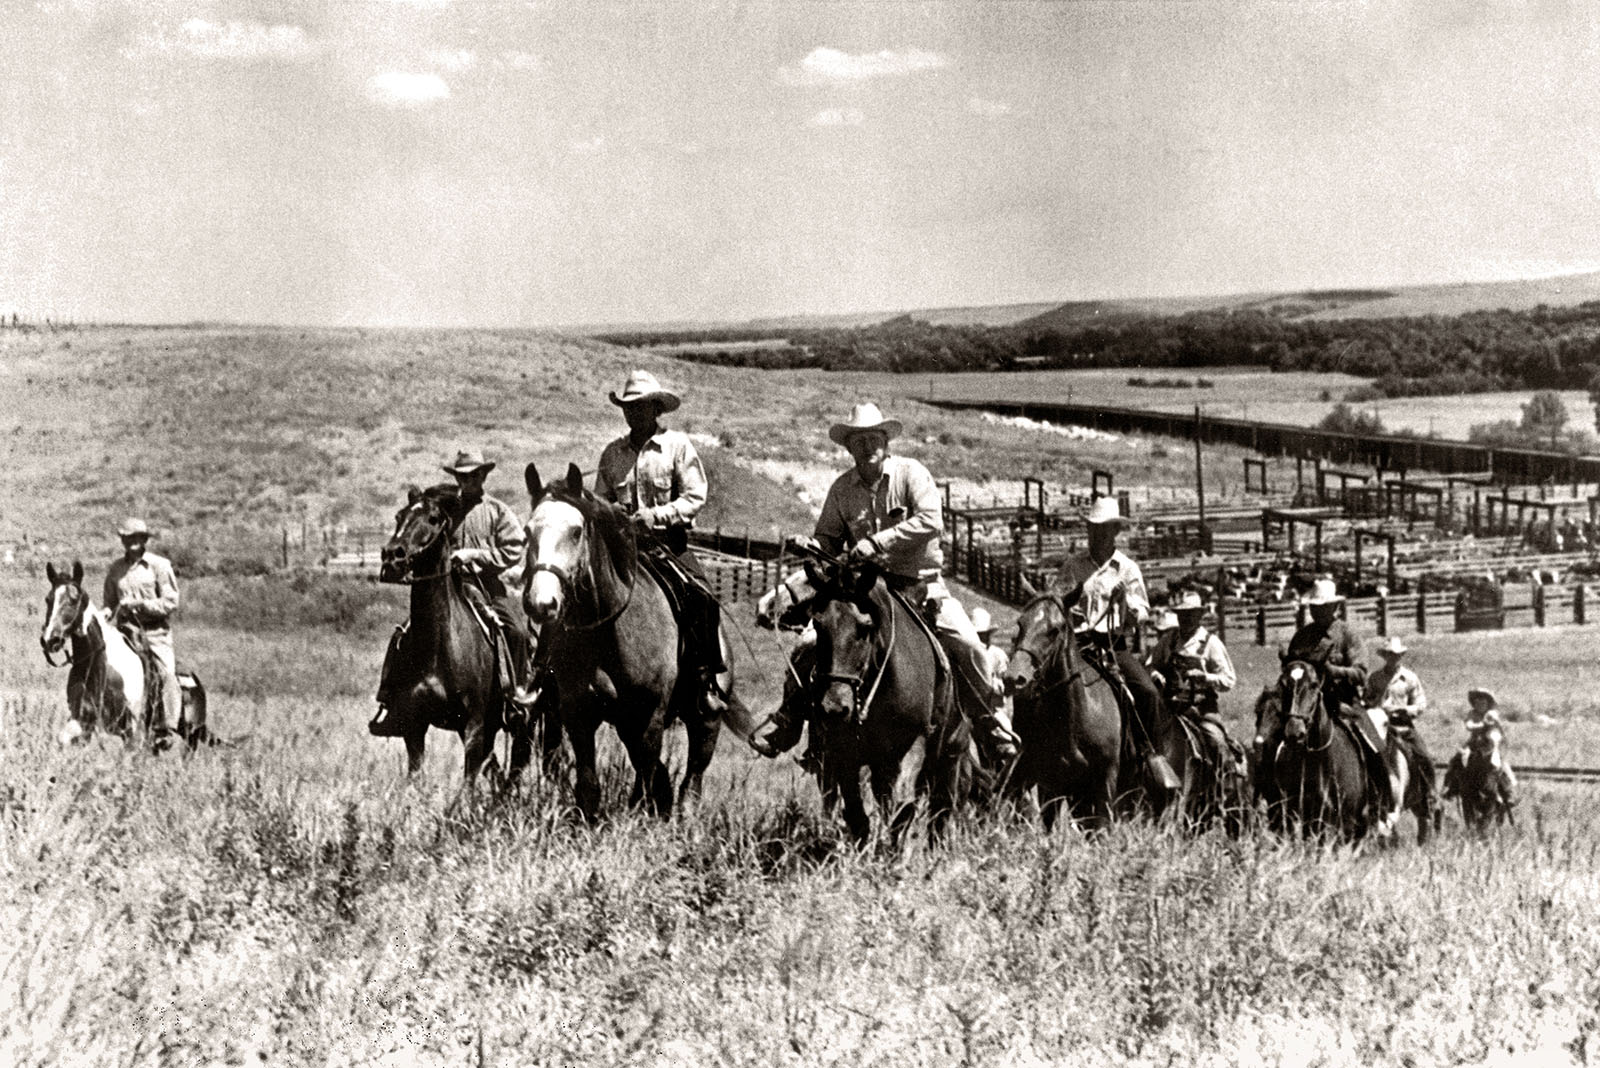 Cowboys riding toward the camera in front of cattle pens